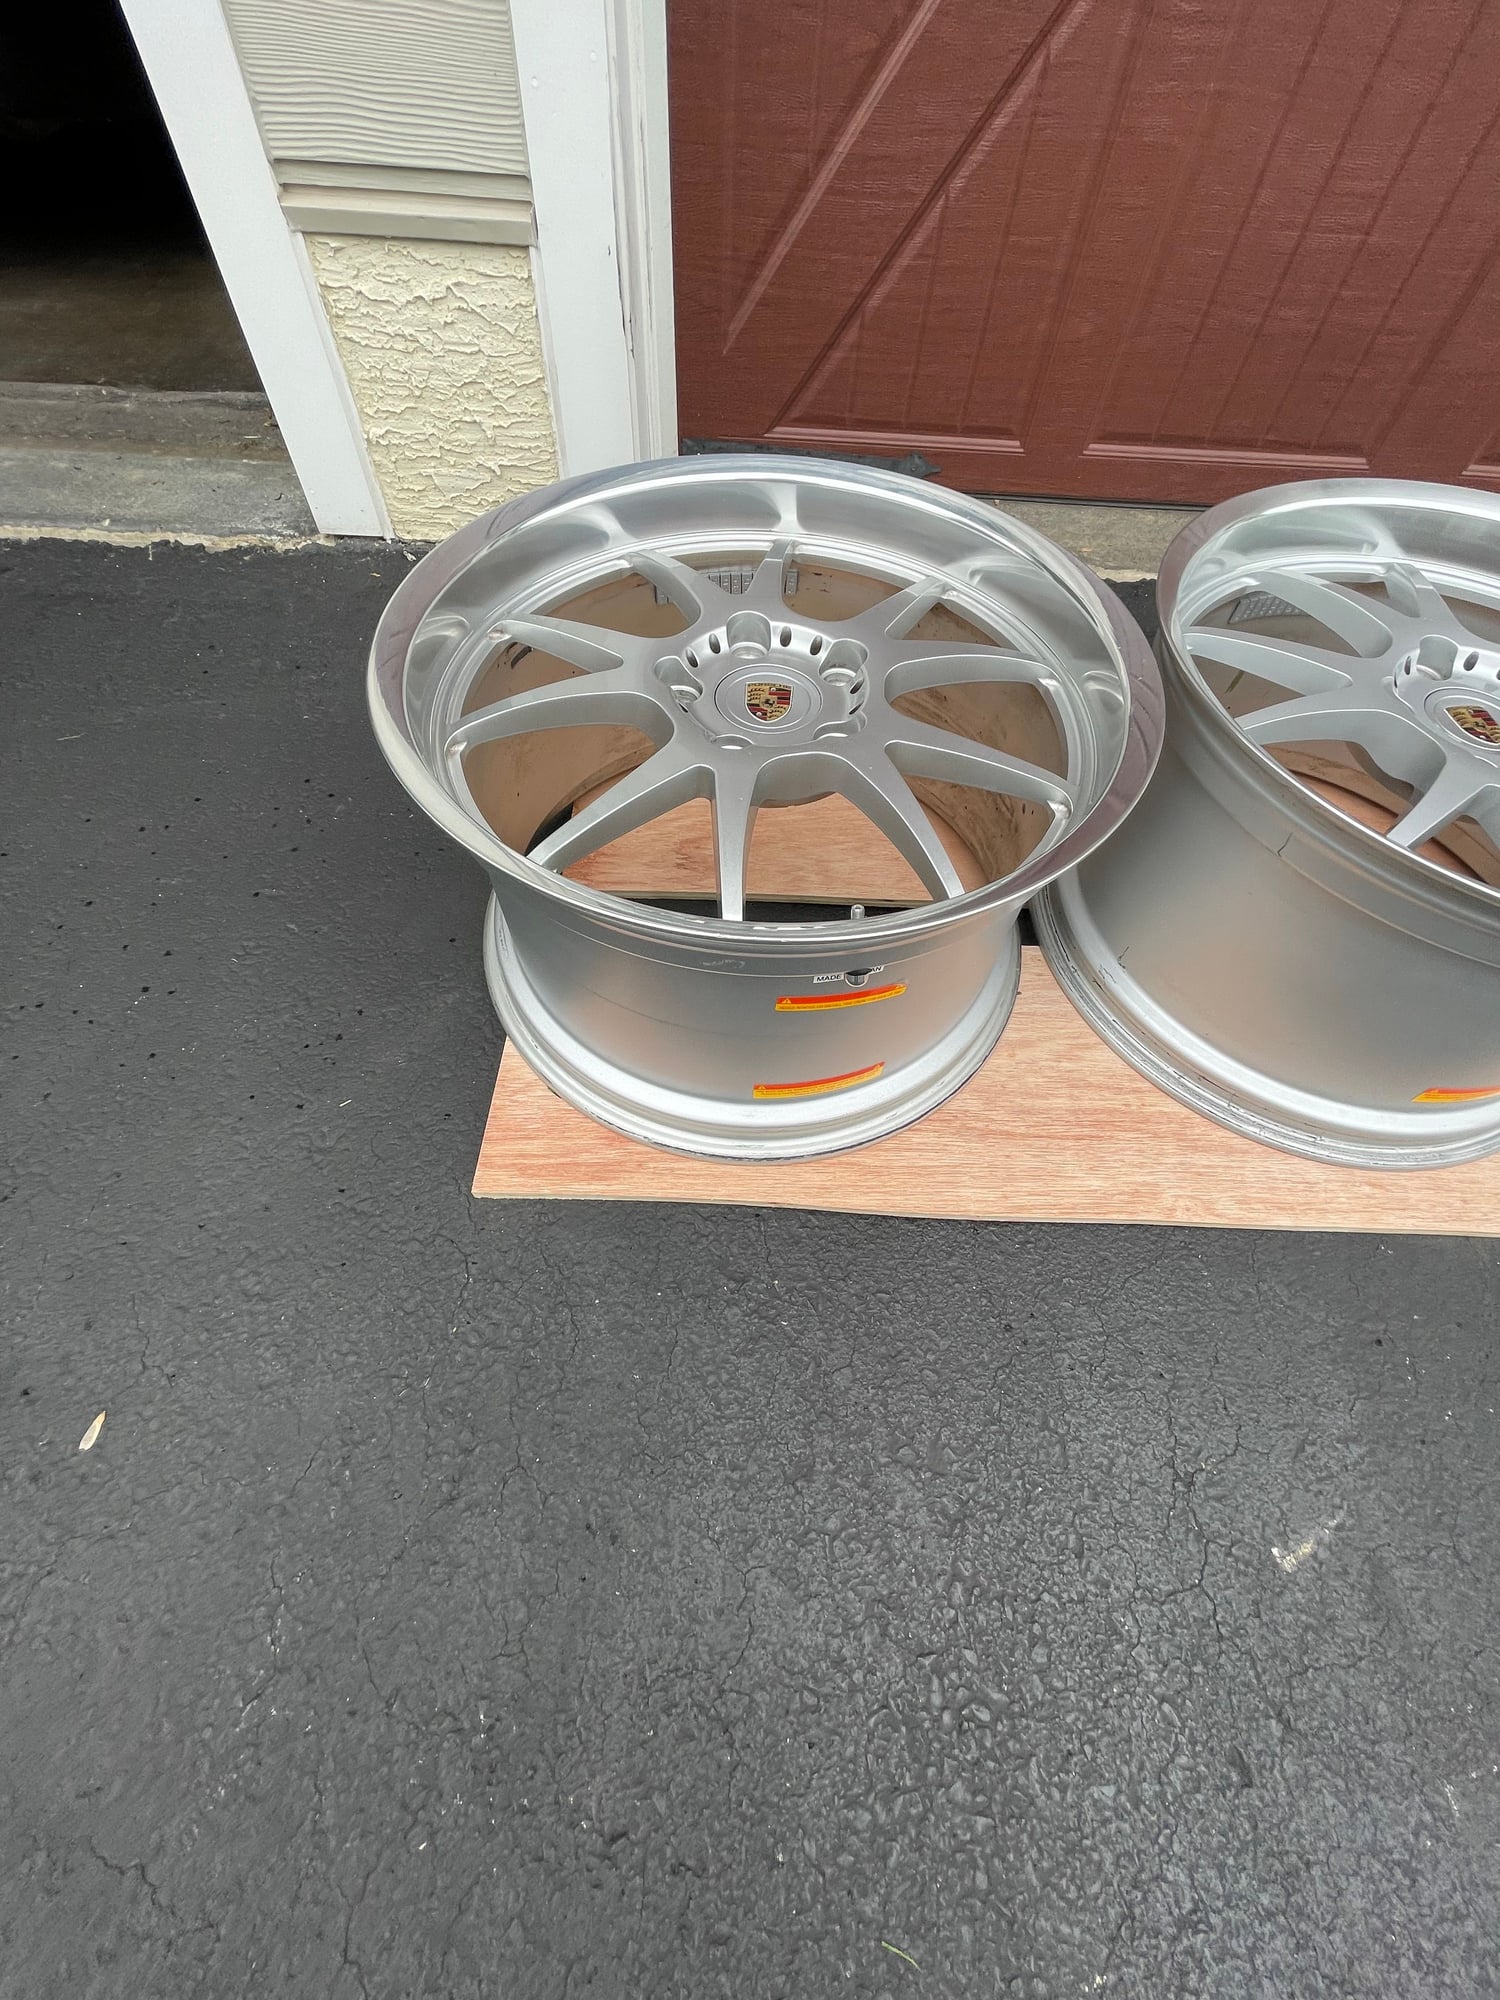 Wheels and Tires/Axles - FS: Champion RS98 Lightweight Wheels and Center Caps - Used - 1999 to 2021 Porsche All Models - 1999 to 2011 Porsche 911 - West Chester, PA 19380, United States